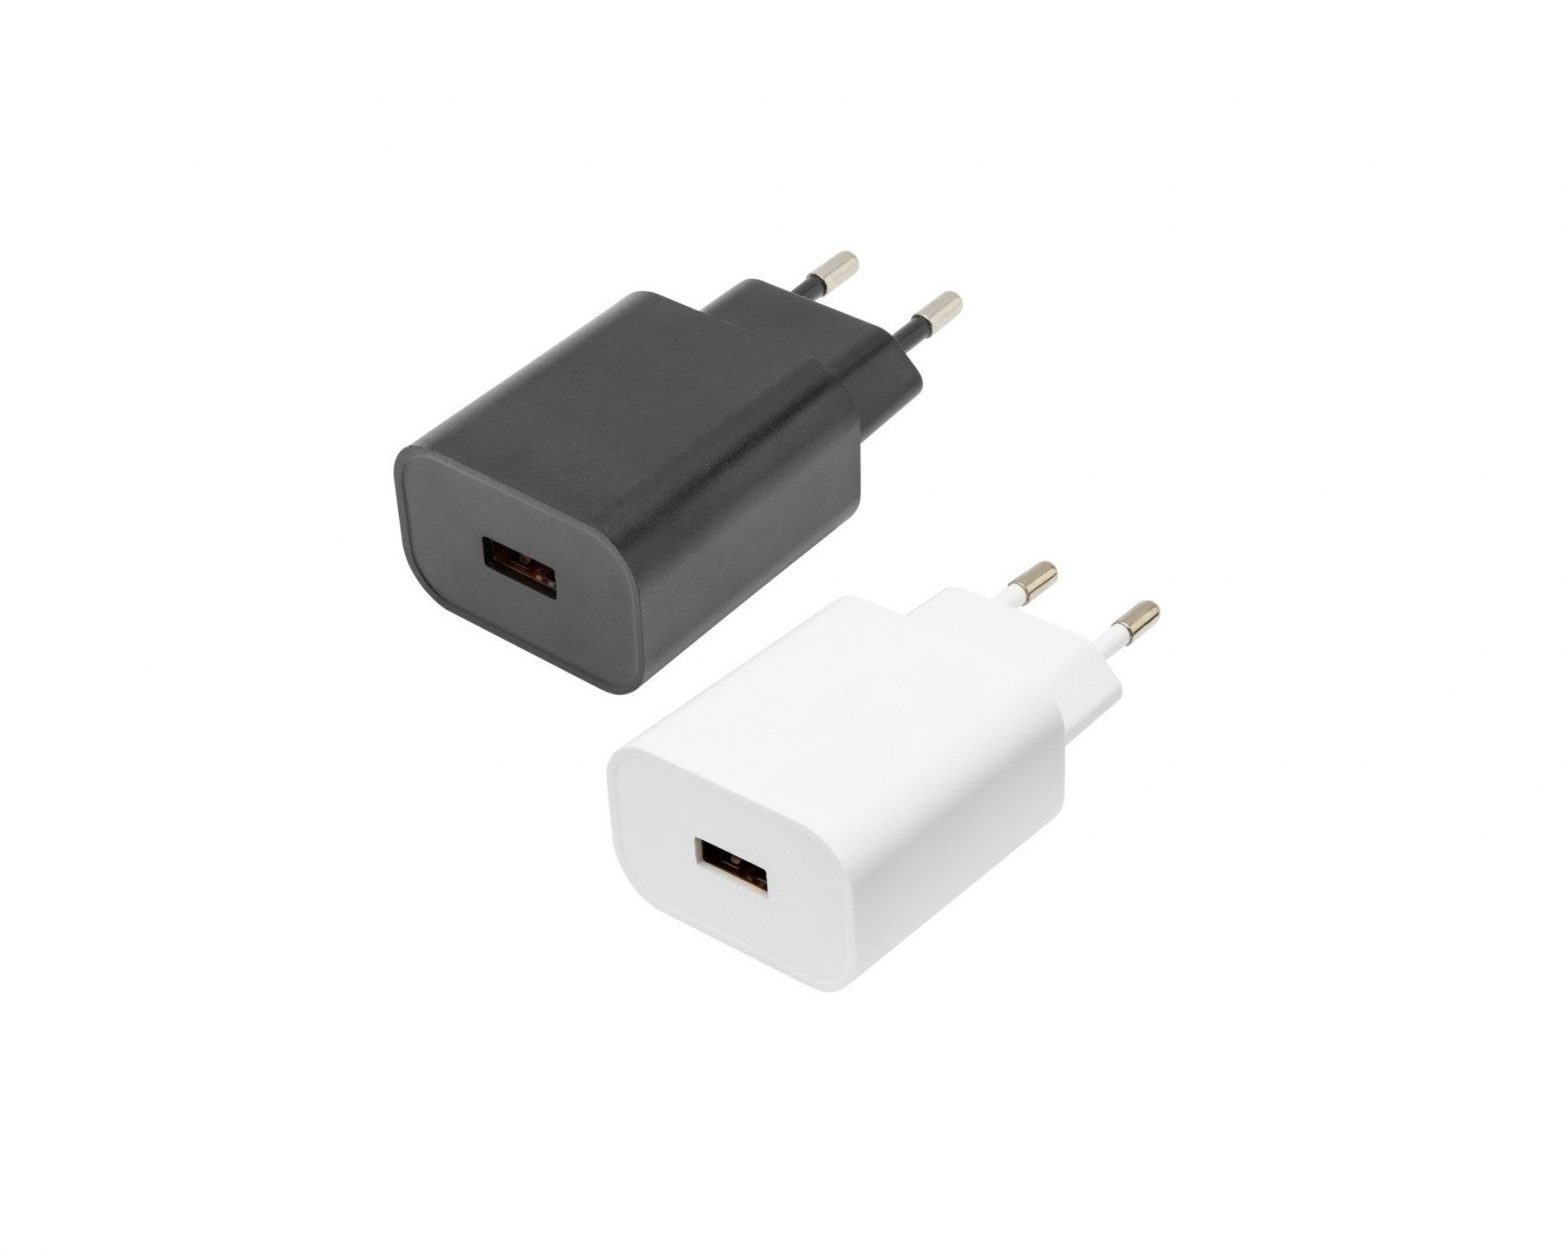 Linocell USB Quick Charge 3.0 charger User Manual